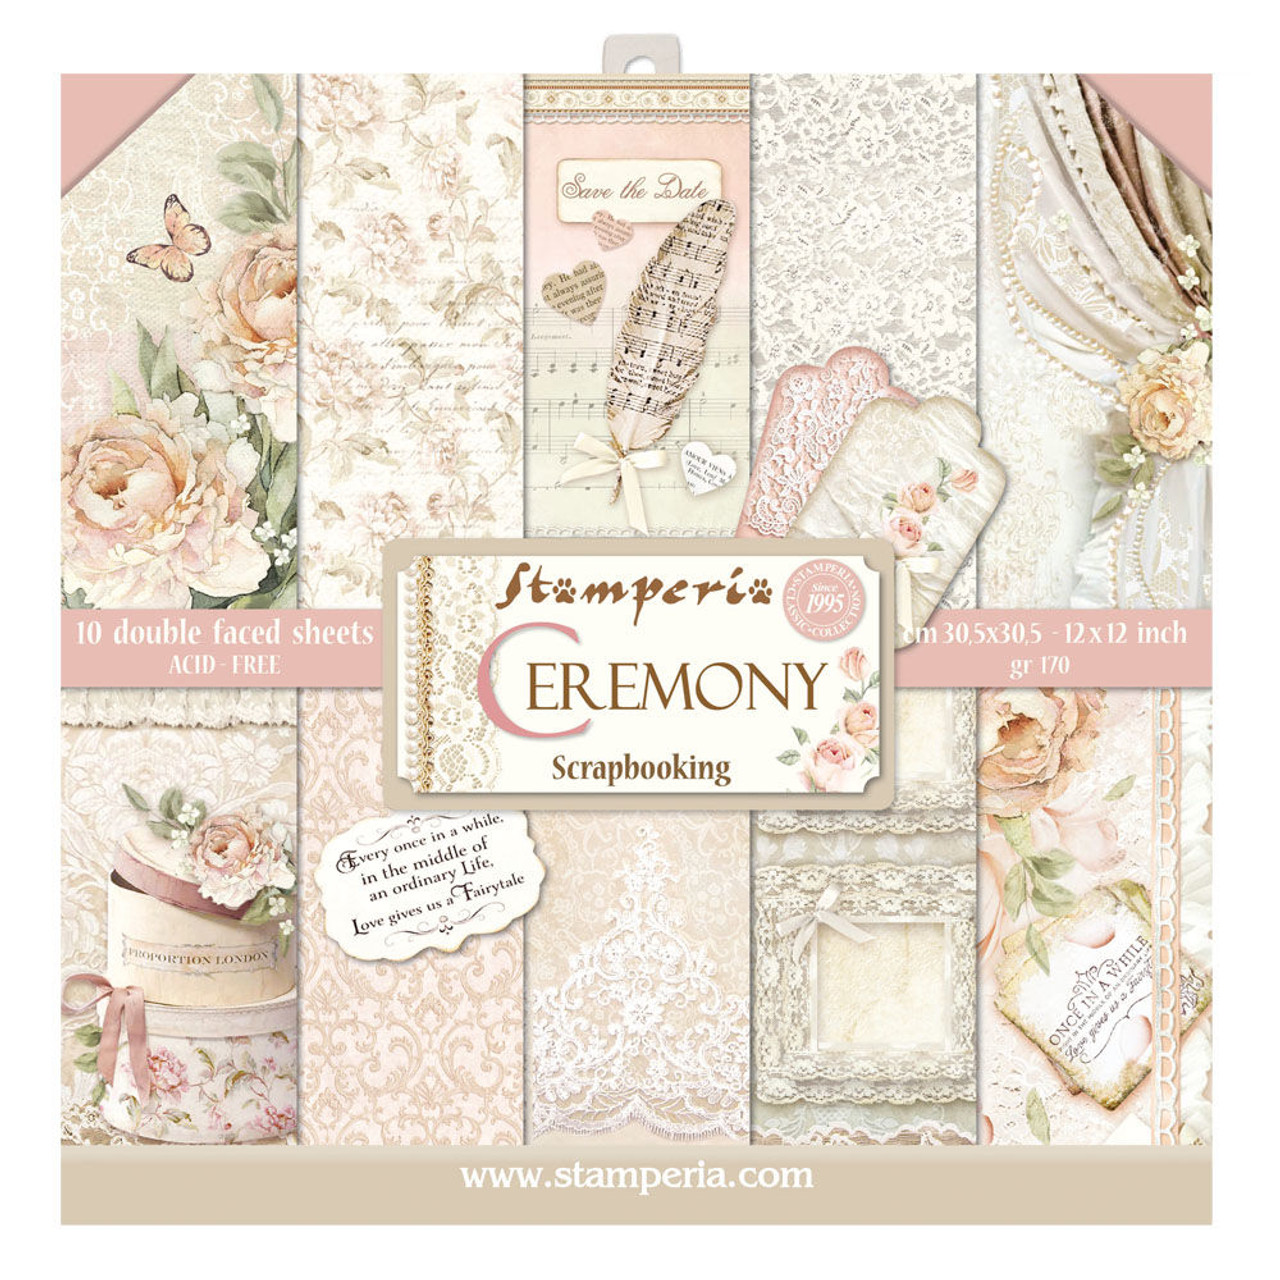 Scrapbooking card with Sunday afternoon paper collection - ABstudio  scrapbooking & decoupage supplies